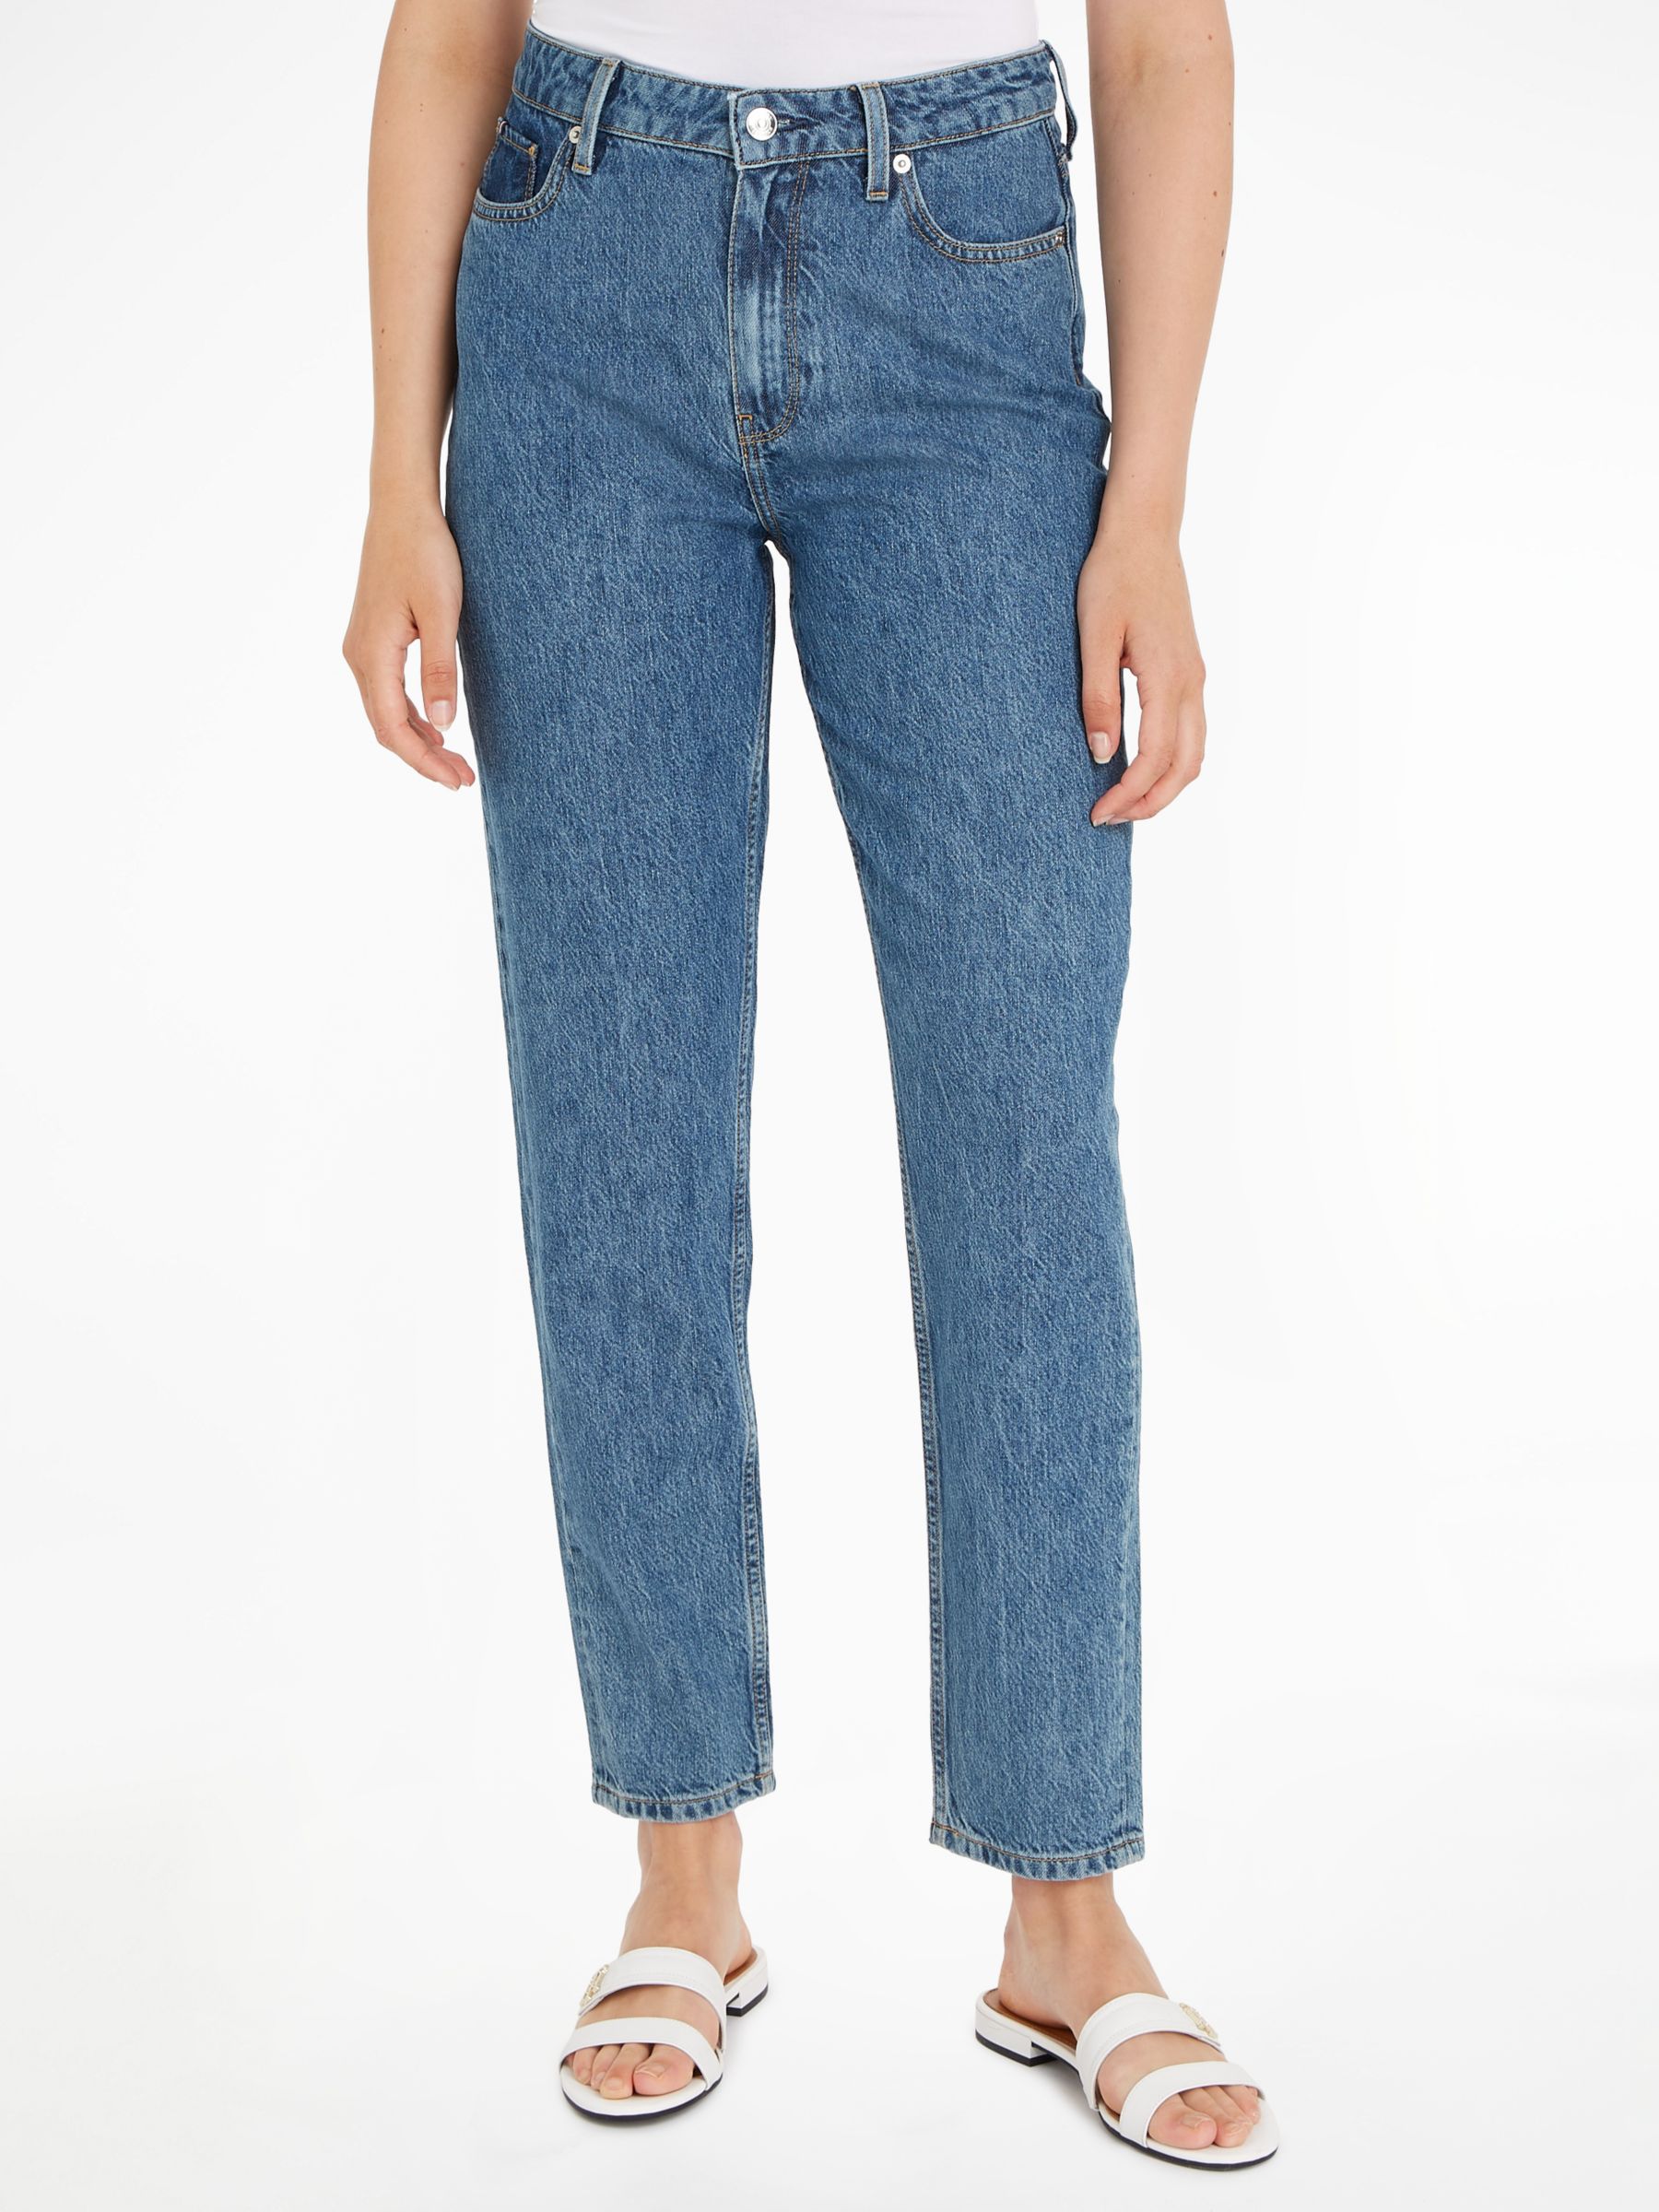 Tommy Hilfiger Tapered High Waist Jeans, Blue at John Lewis & Partners